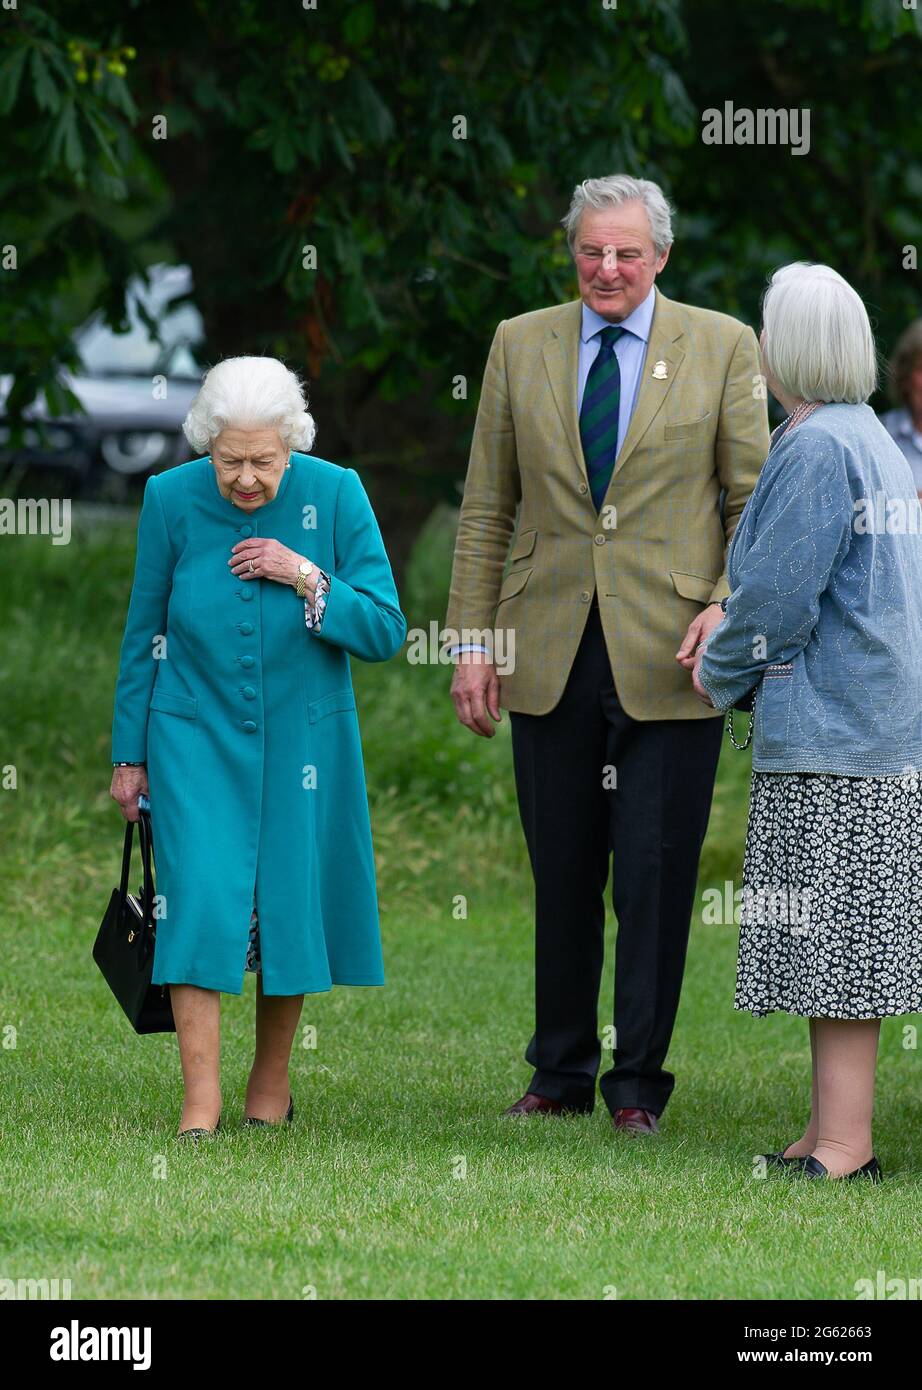 Windsor, Berkshire, UK. 1st July, 2021. After a visit to Scotland this week Queen Elizabeth II was at Royal Windsor Horse Show this afternoon to watch her horses competing. Royal Windsor Horse Show has been taking place since 1943 in the private grounds of Windsor Castle, home to Her Majesty. Credit: Maureen McLean/Alamy Stock Photo